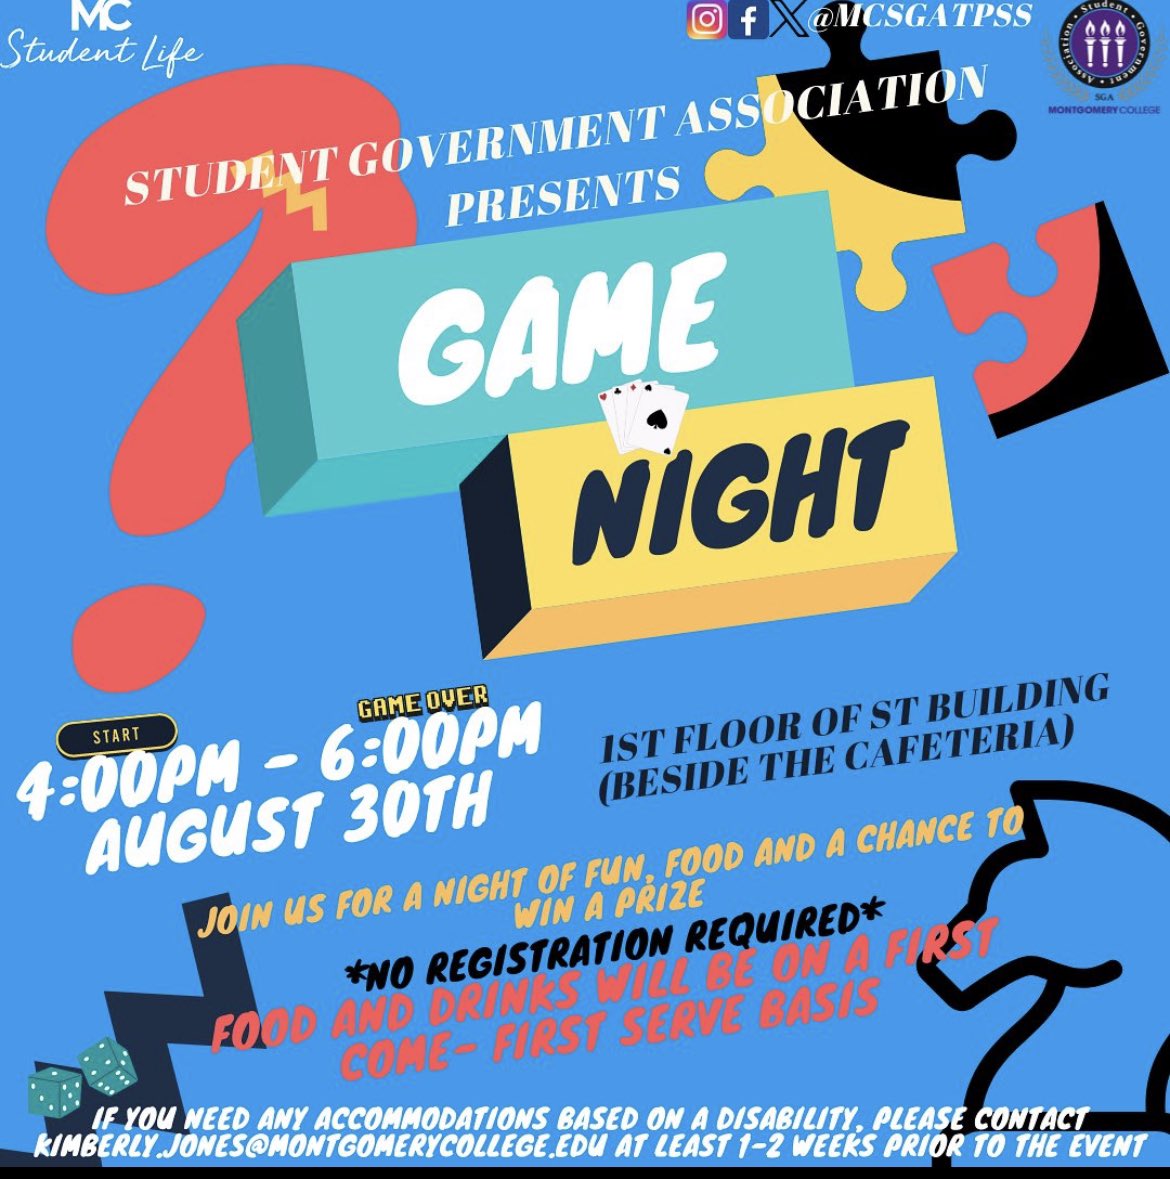 ♟️Join us for an evening of board games, a chance to meet new people. Grab your friends and mark your calendar while enjoying free snacks and drinks. Mark your calendars for August 30th, 4:00 pm - 6:00 pm on the 1st floor of the Student Services Building. Open to all!